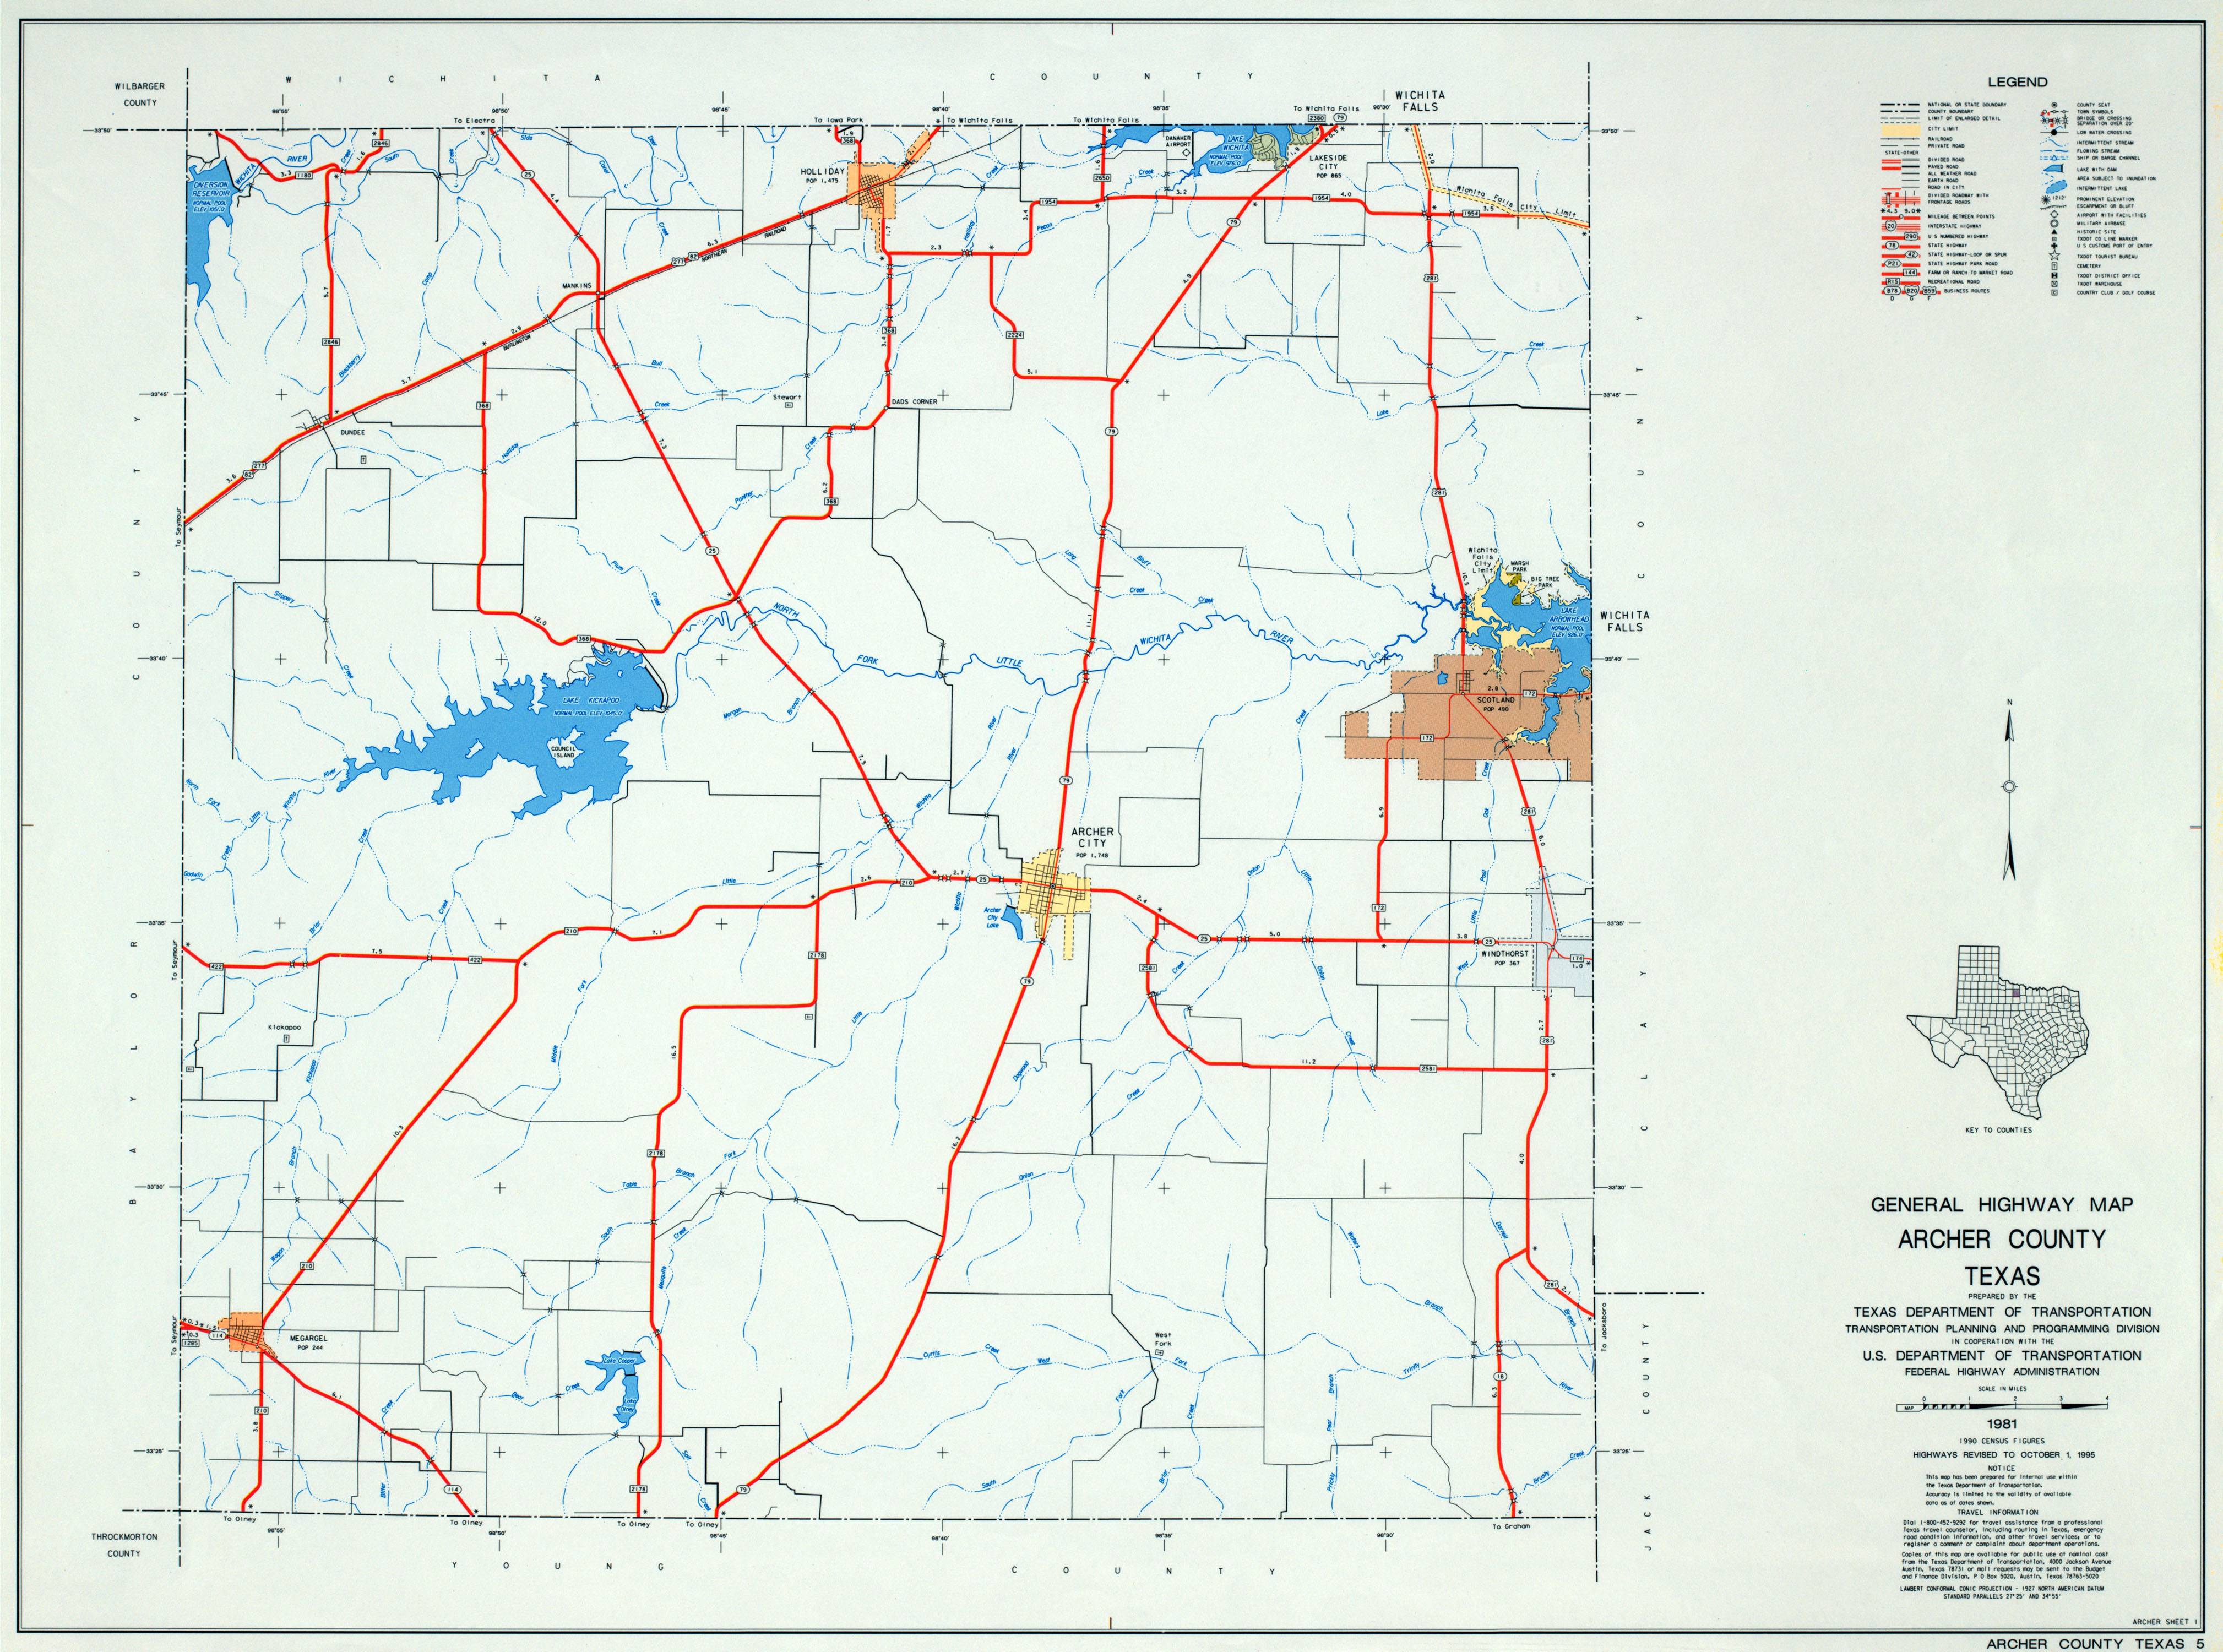 Texas County Highway Maps Browse - Perry-Castañeda Map Collection - Jack County Texas Map